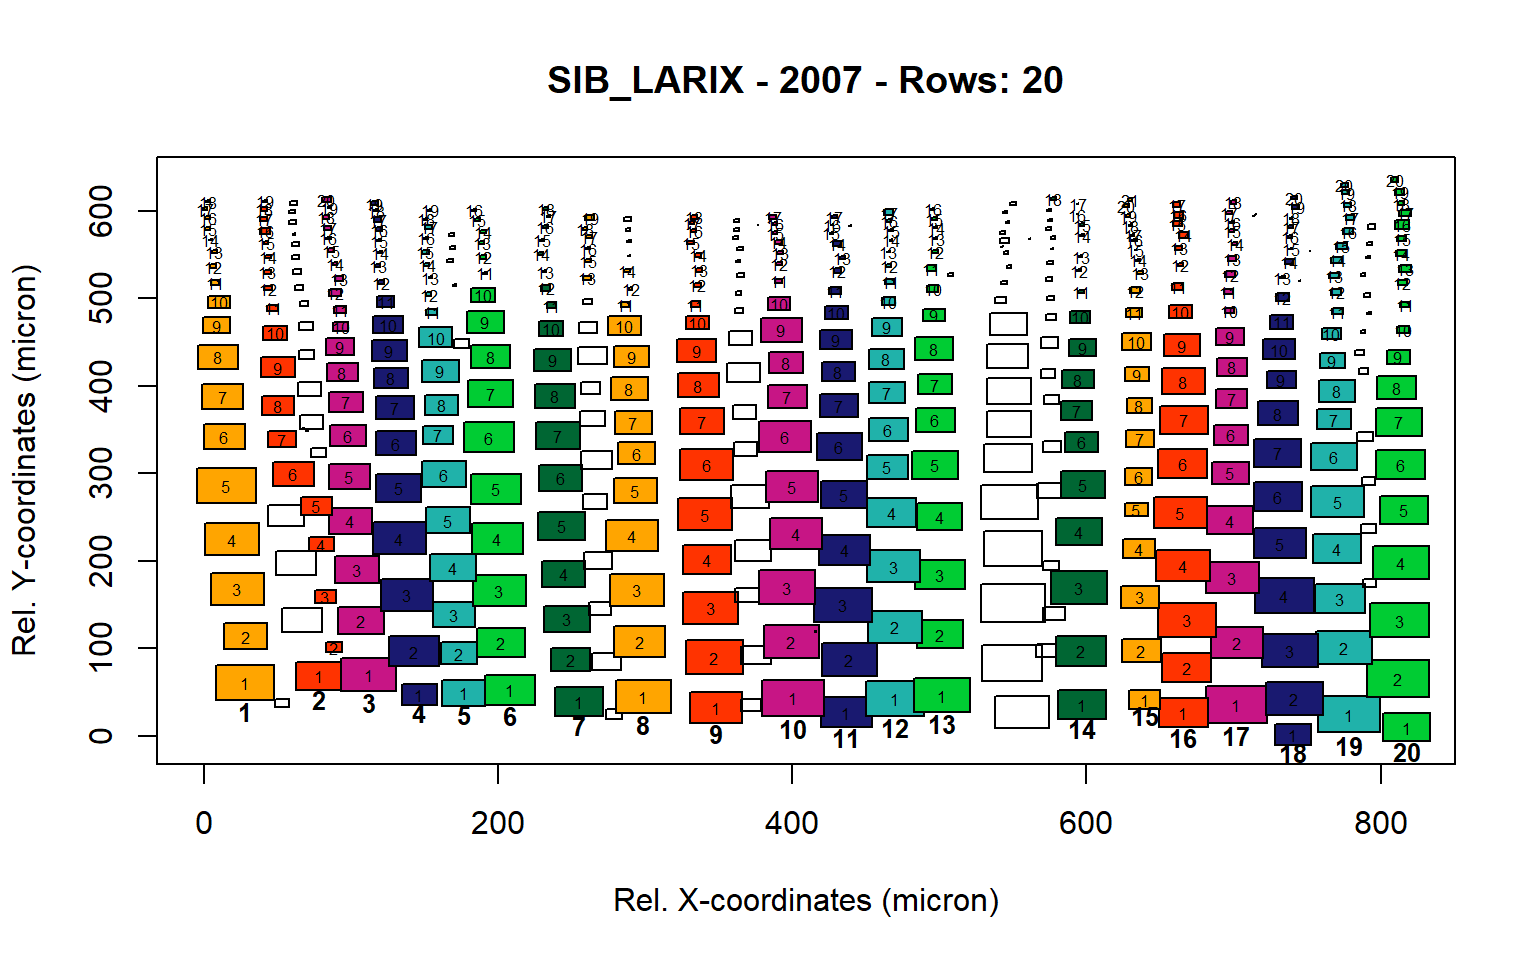 Standard plots generated by the write.output() function for Siberian Larix siberica (species="SIB_LARIX"), including 2007, 2008, 2009 and 2010.